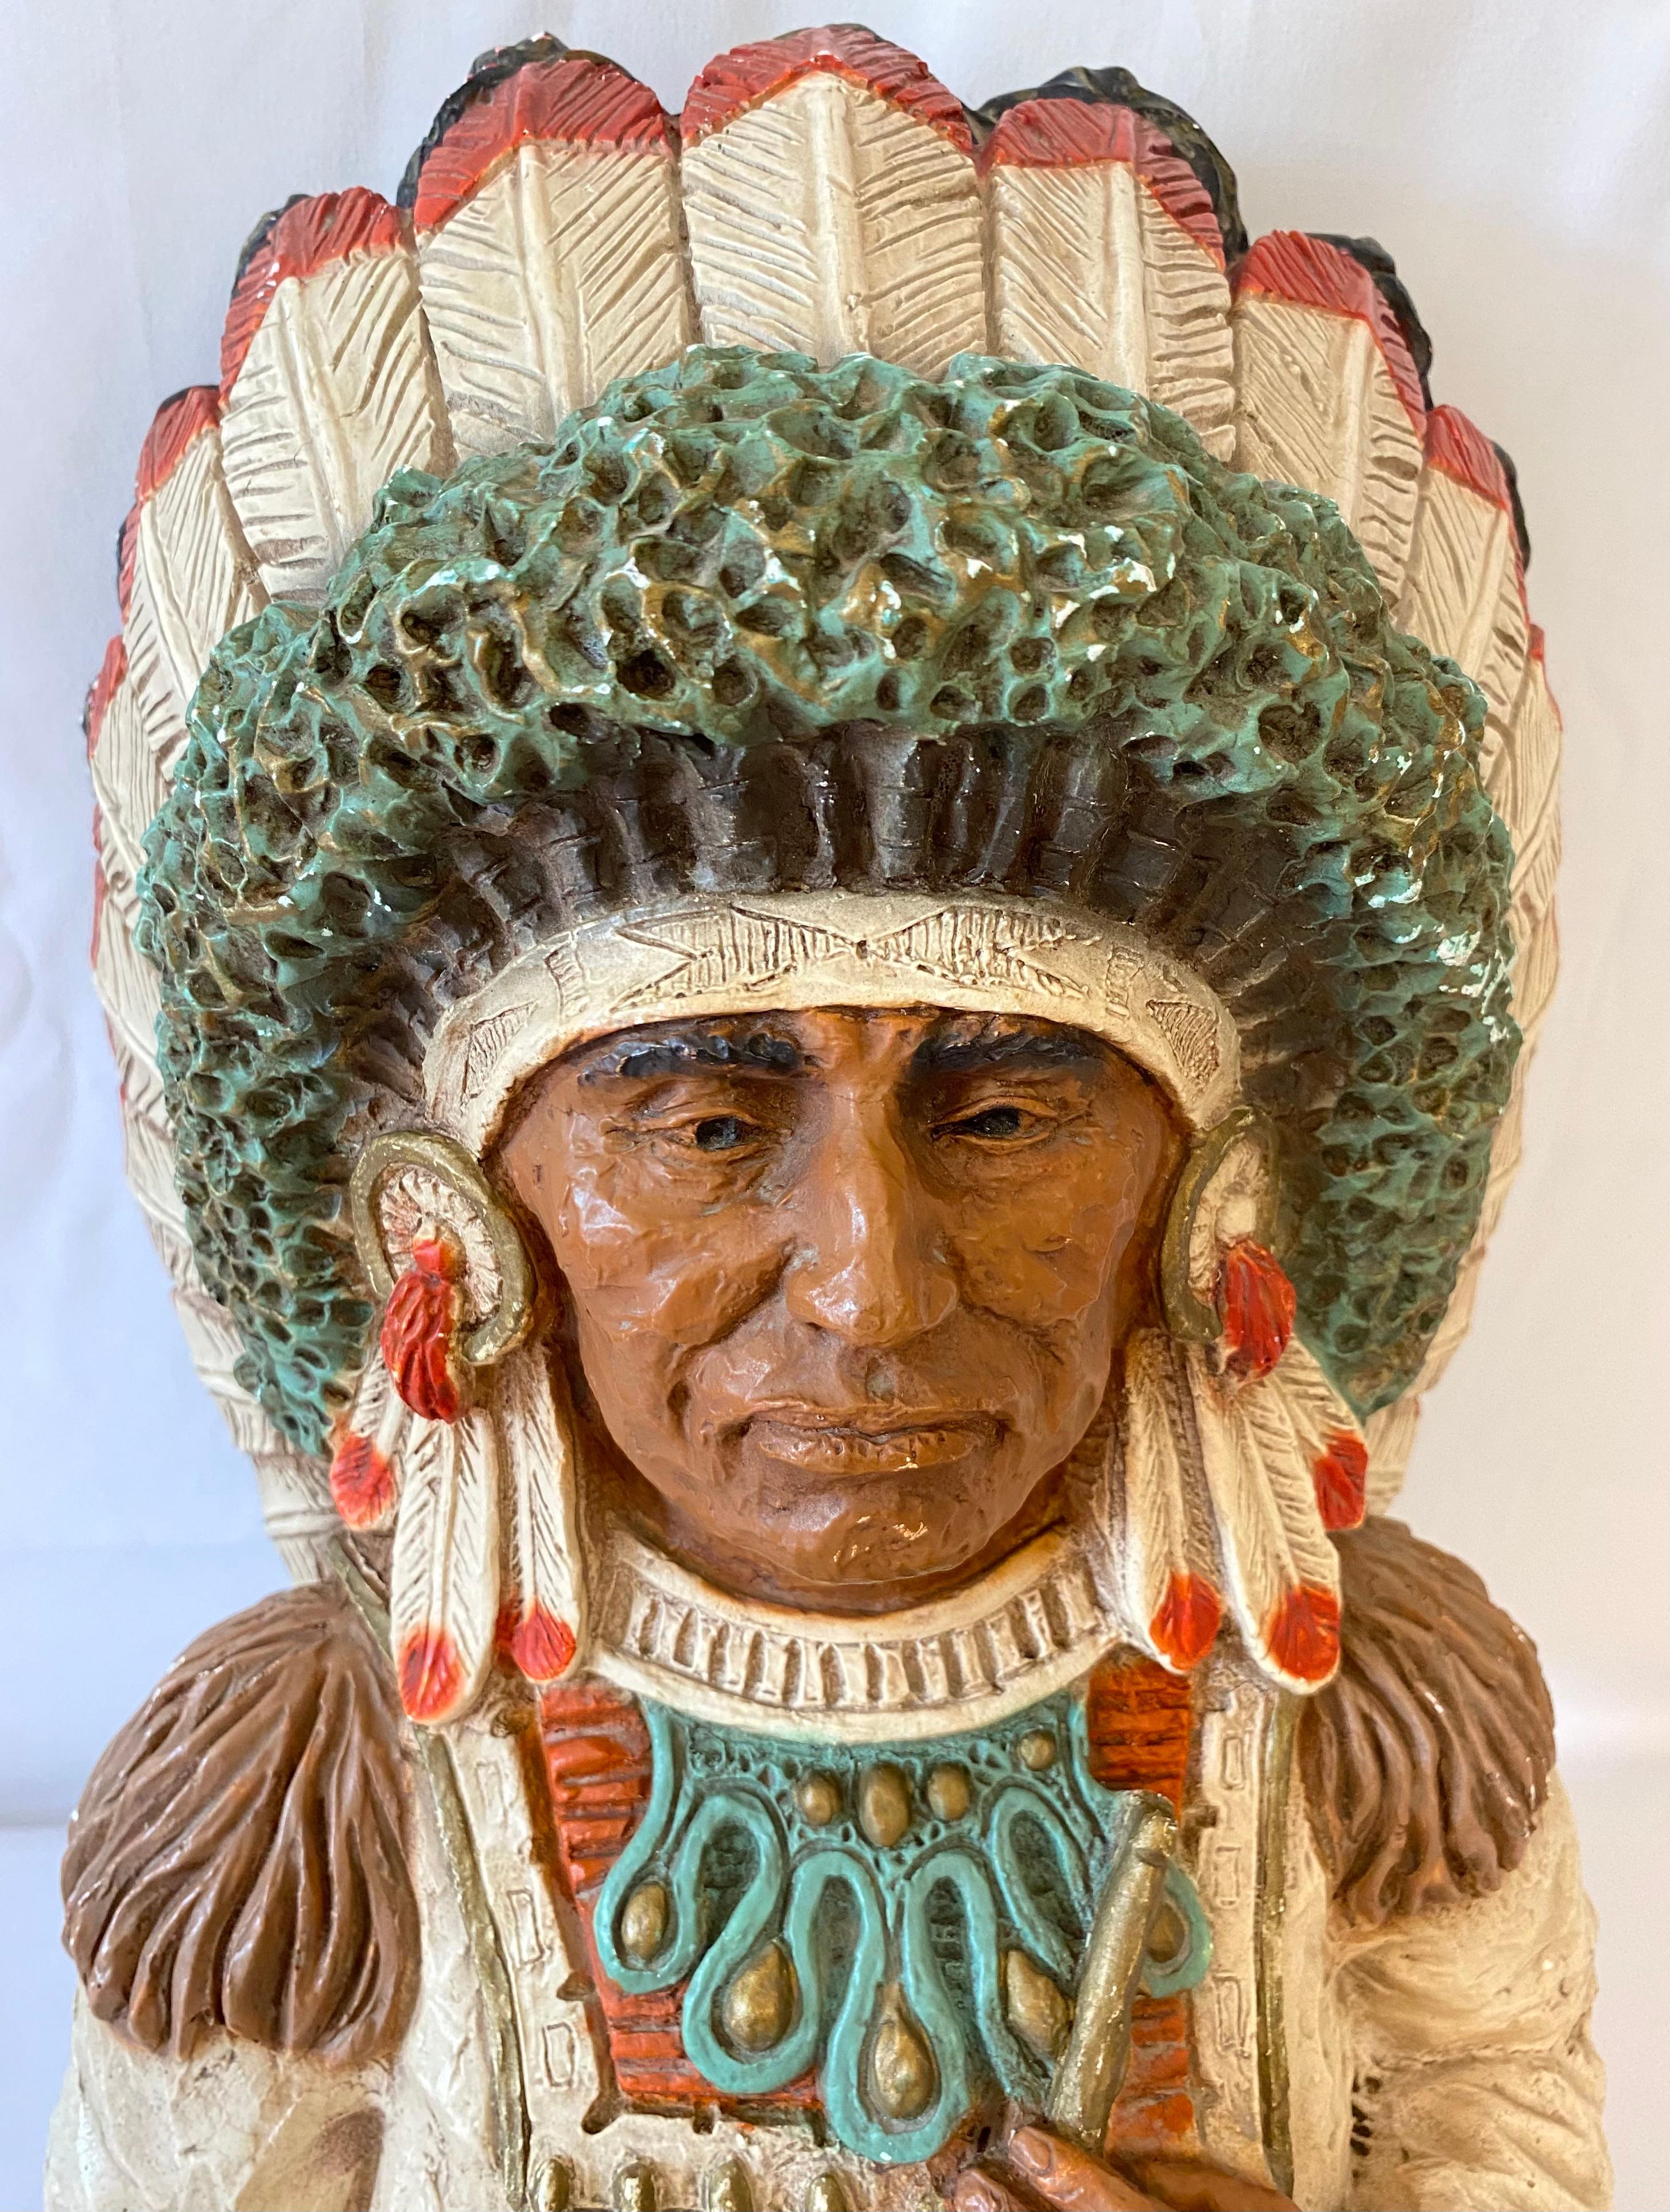 Artfully crafted by Universal Statuary Corp this collectible Native American Indian sculpture or statue will look great in any western setting or as an educational accessory for children. Designed by Vaughn Kendrick in 1973. 
Signed.

Striking